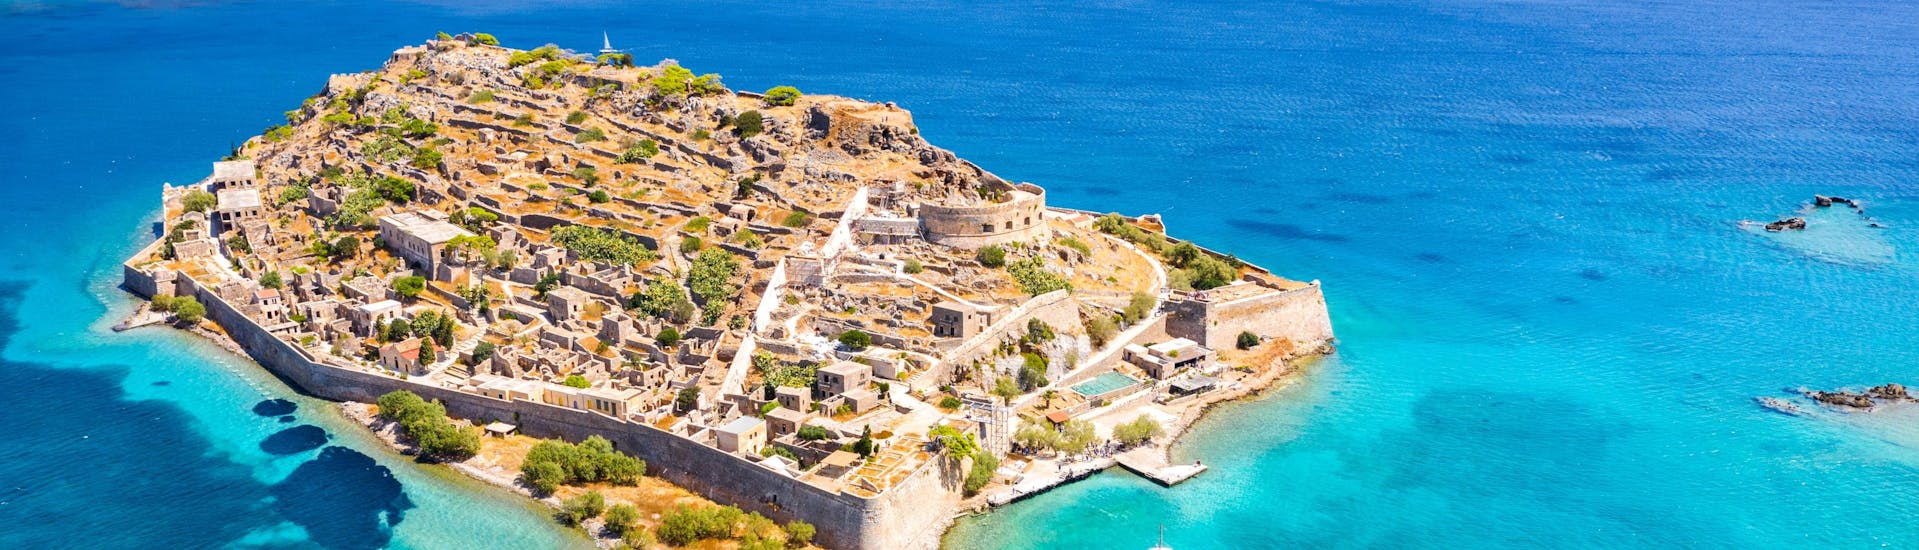 Picture taken from the sky of the Spinalonga Island.